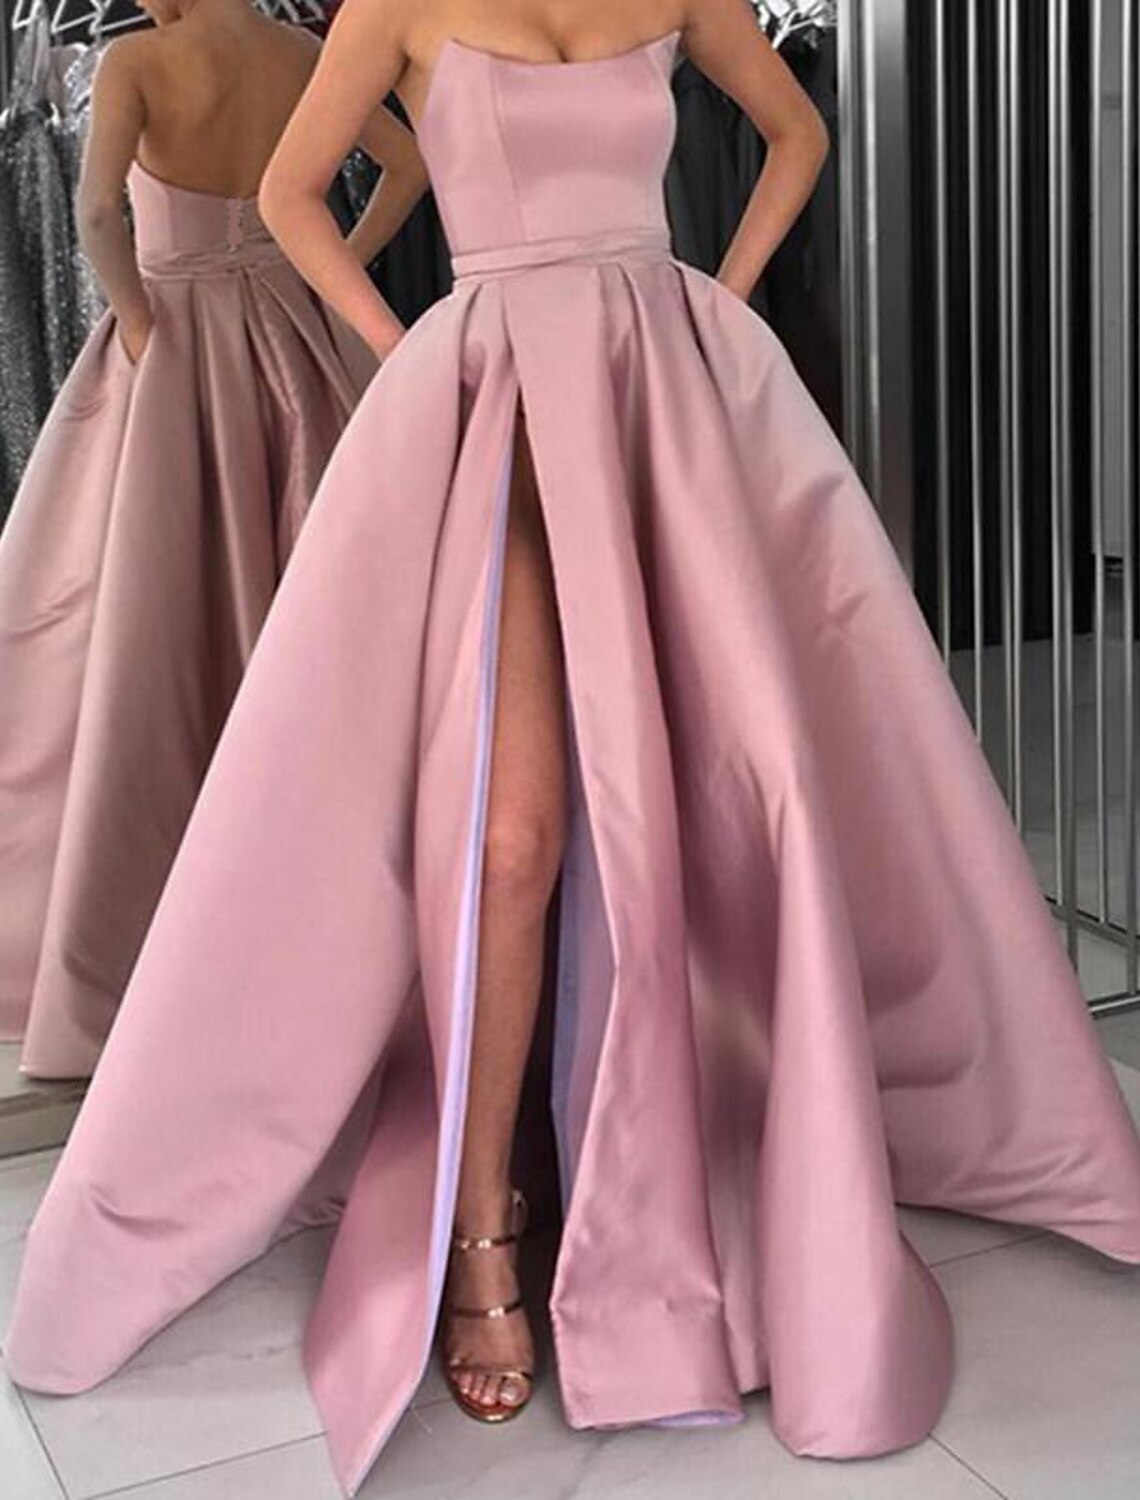 Ball Gown Party Dresses Minimalist Dress Prom Wedding Party Floor Length Sleeveless Jewel Neck Pocket Italy Satin Ladder Back with Sleek Slit Pure Color